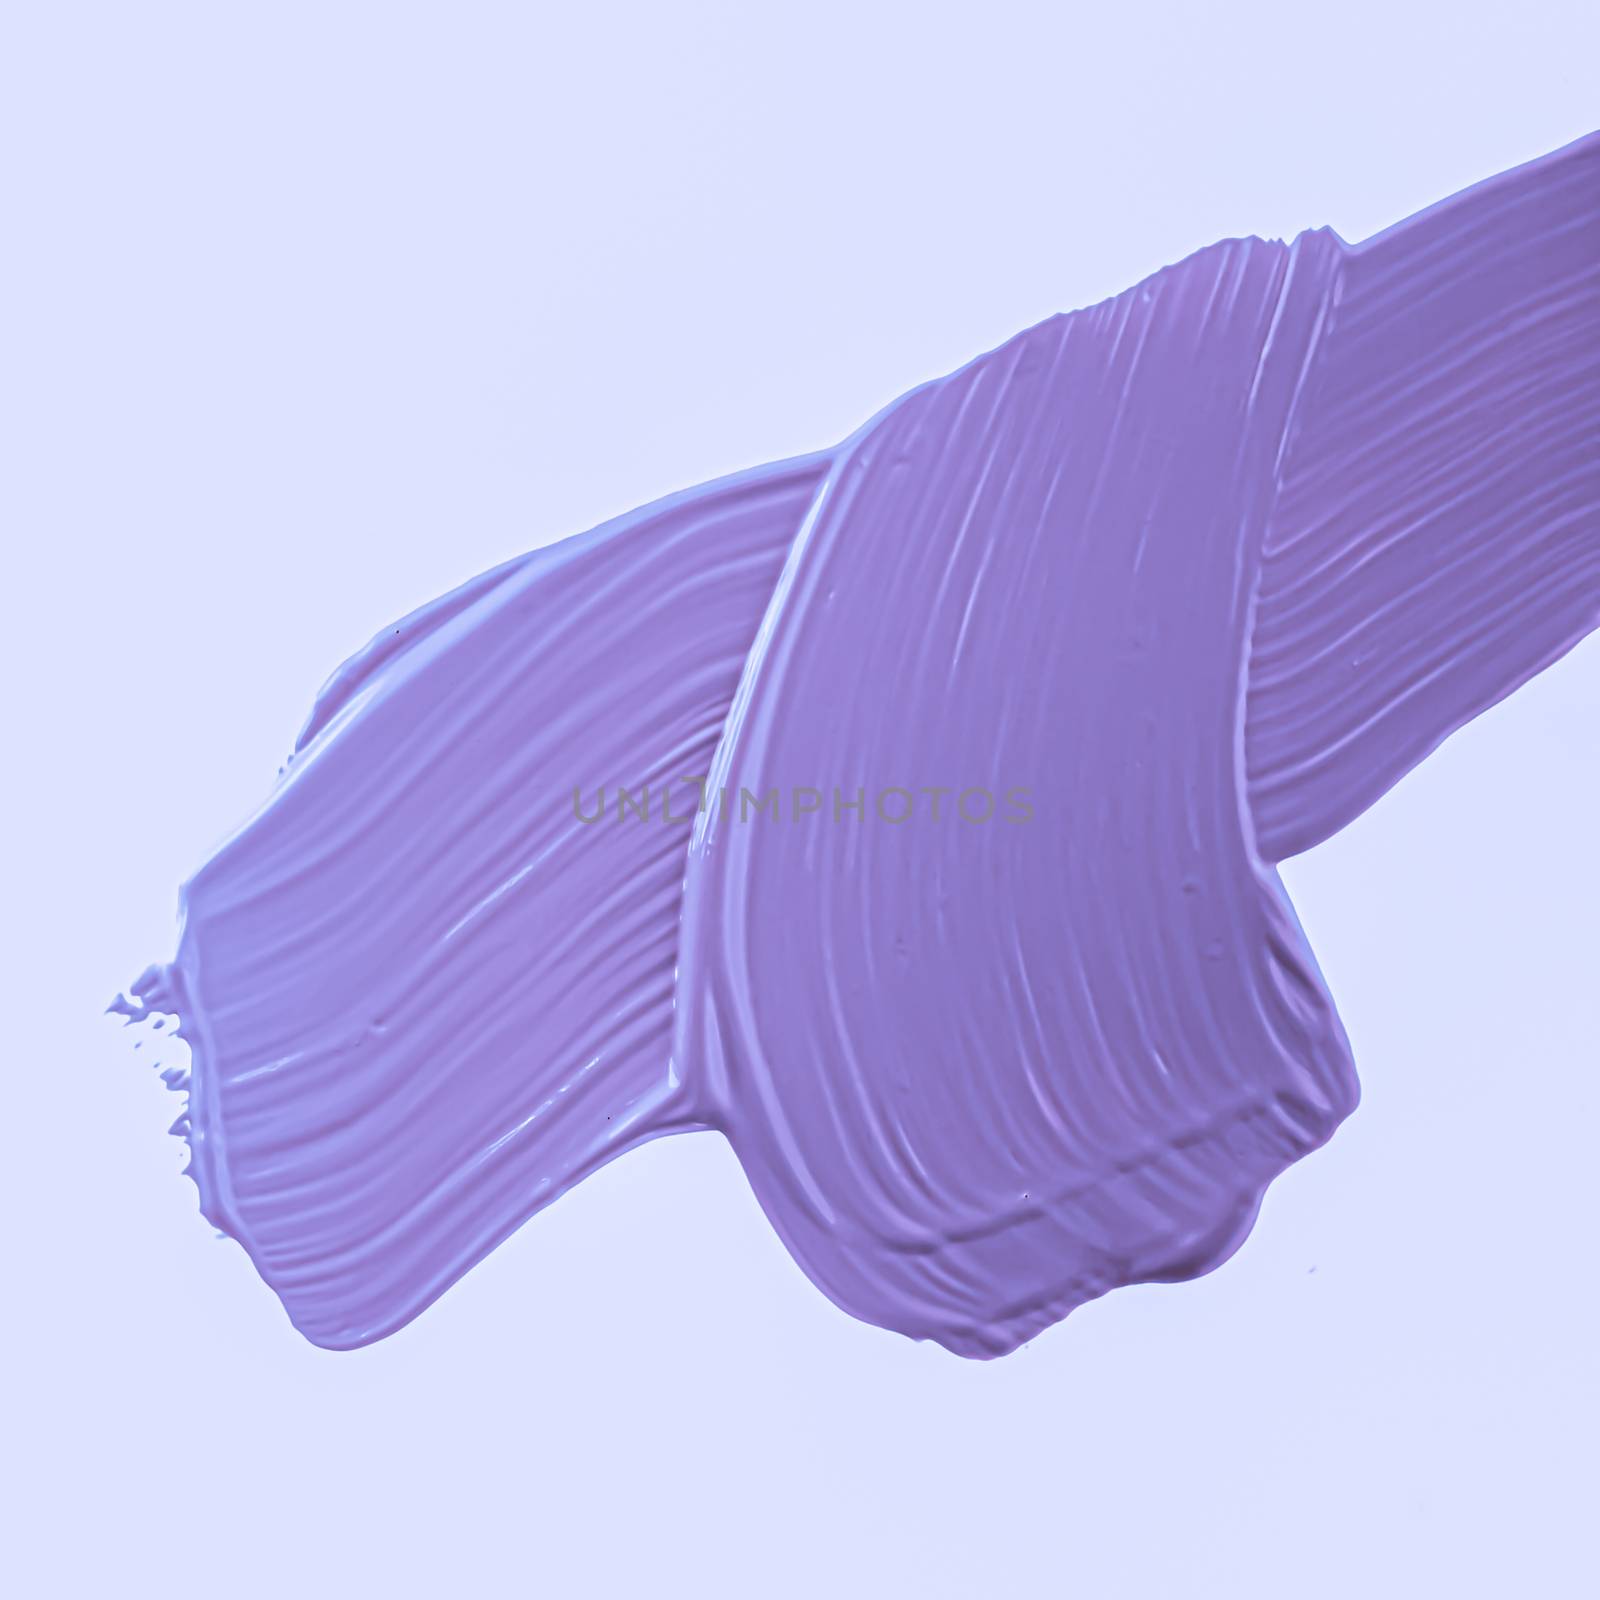 Purple brush stroke or makeup smudge closeup, beauty cosmetics a by Anneleven